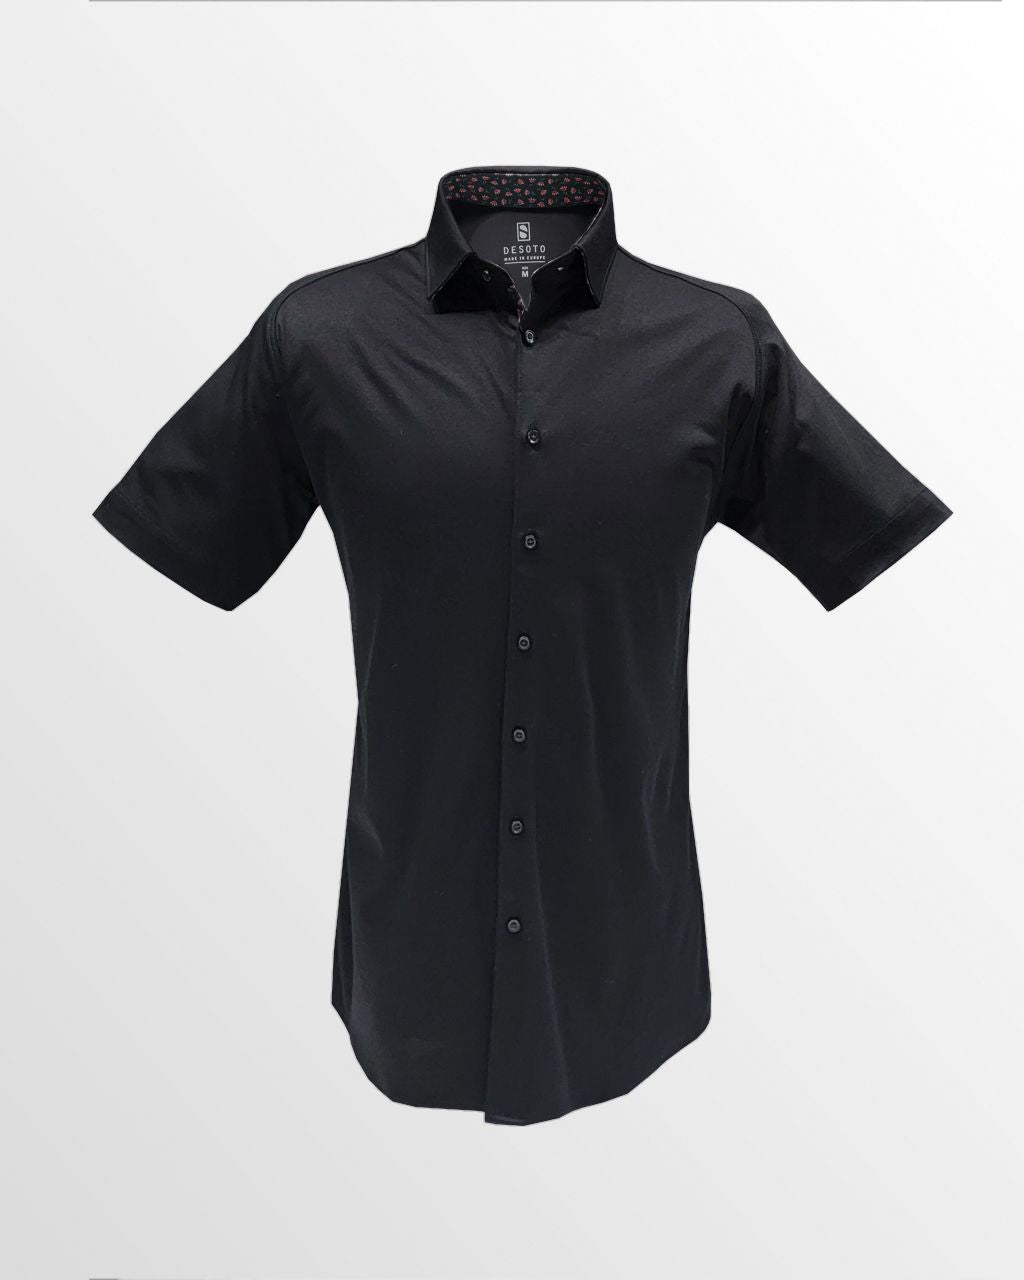 Desoto Short Sleeve Jersey Shirt in Black with Contrast Collar